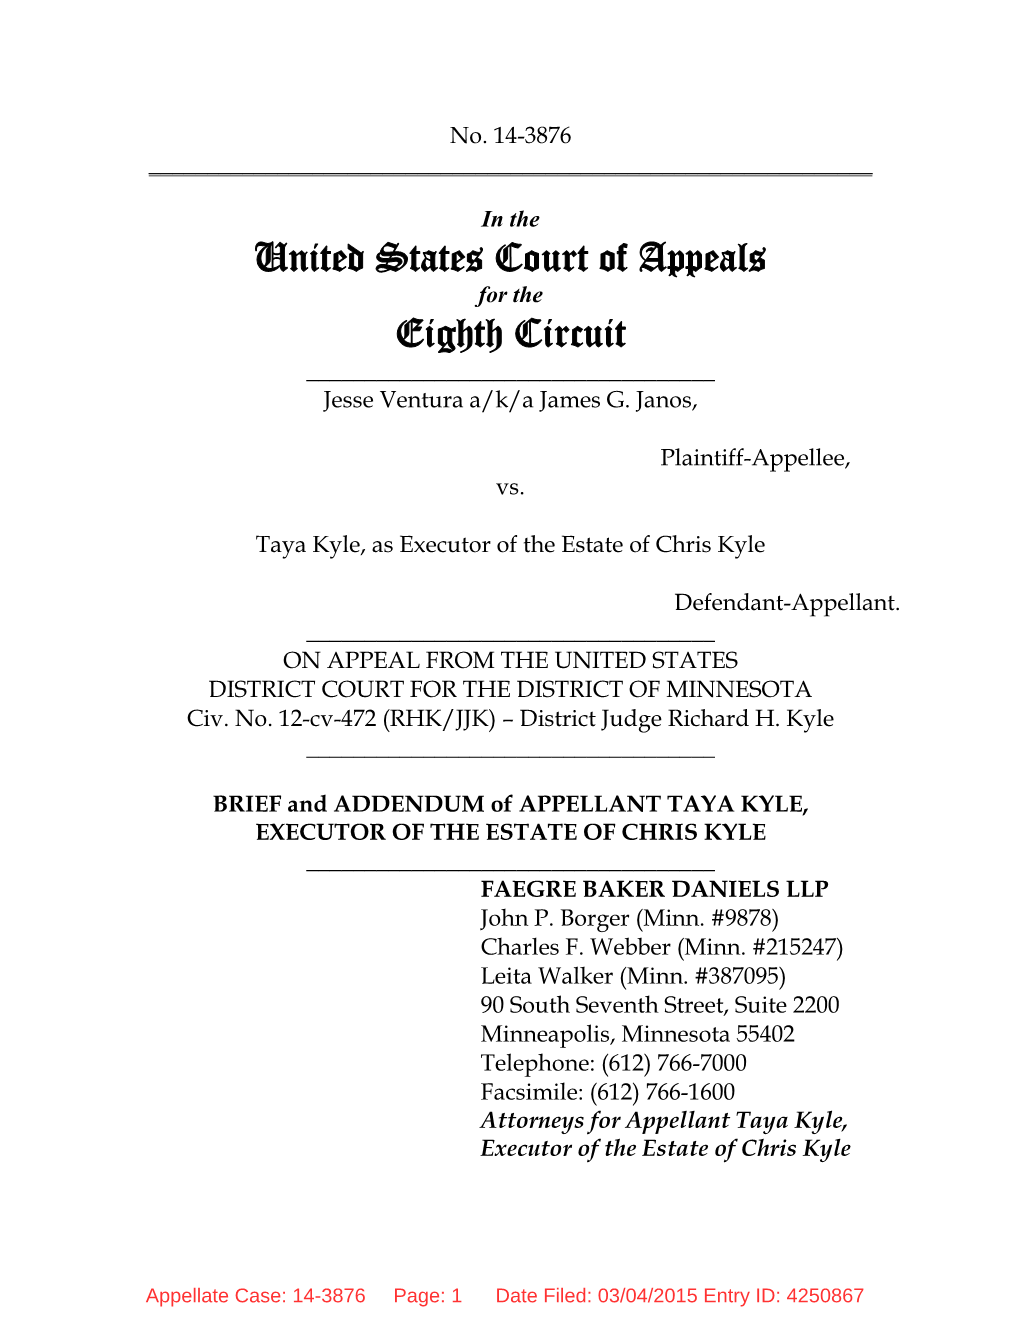 United States Court of Appeals Eighth Circuit